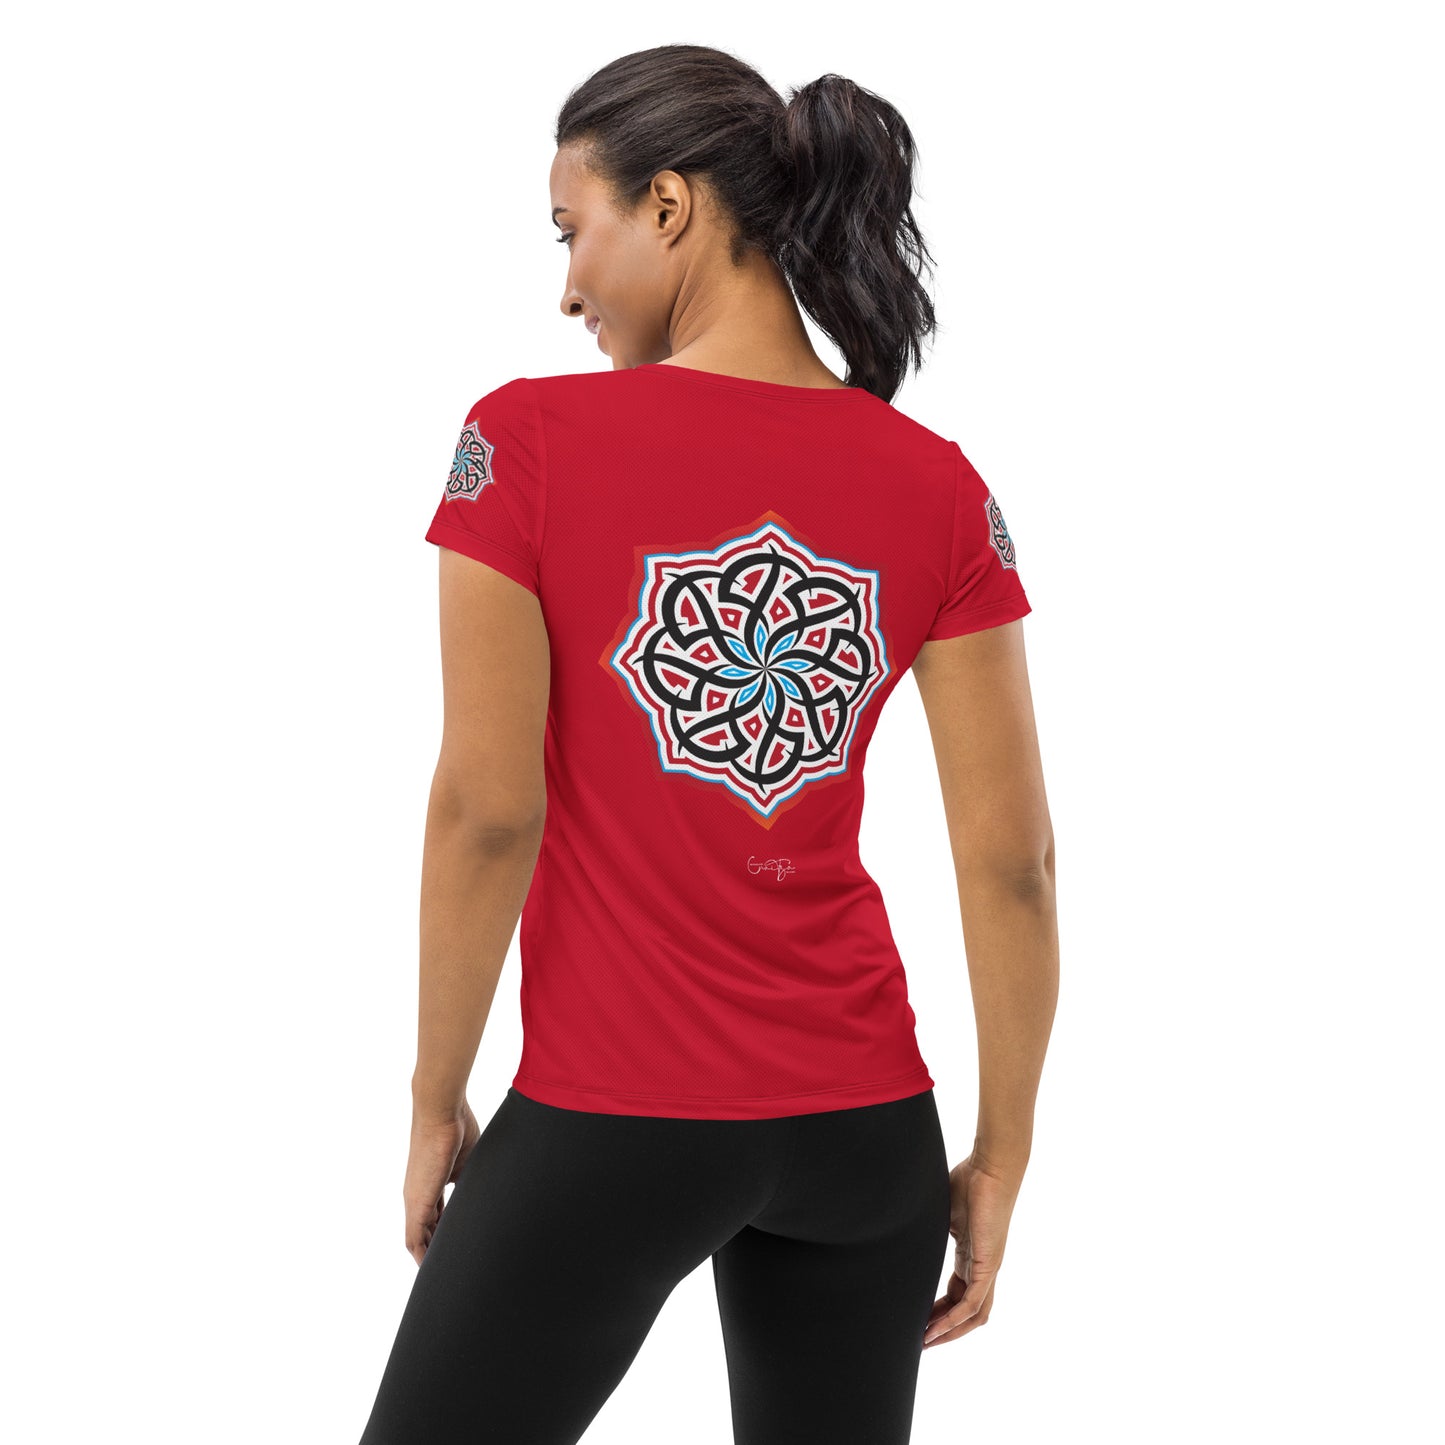 Arabian Summer Dream - All-Over Print Women's Athletic T-shirt by Craitza© Red Edition